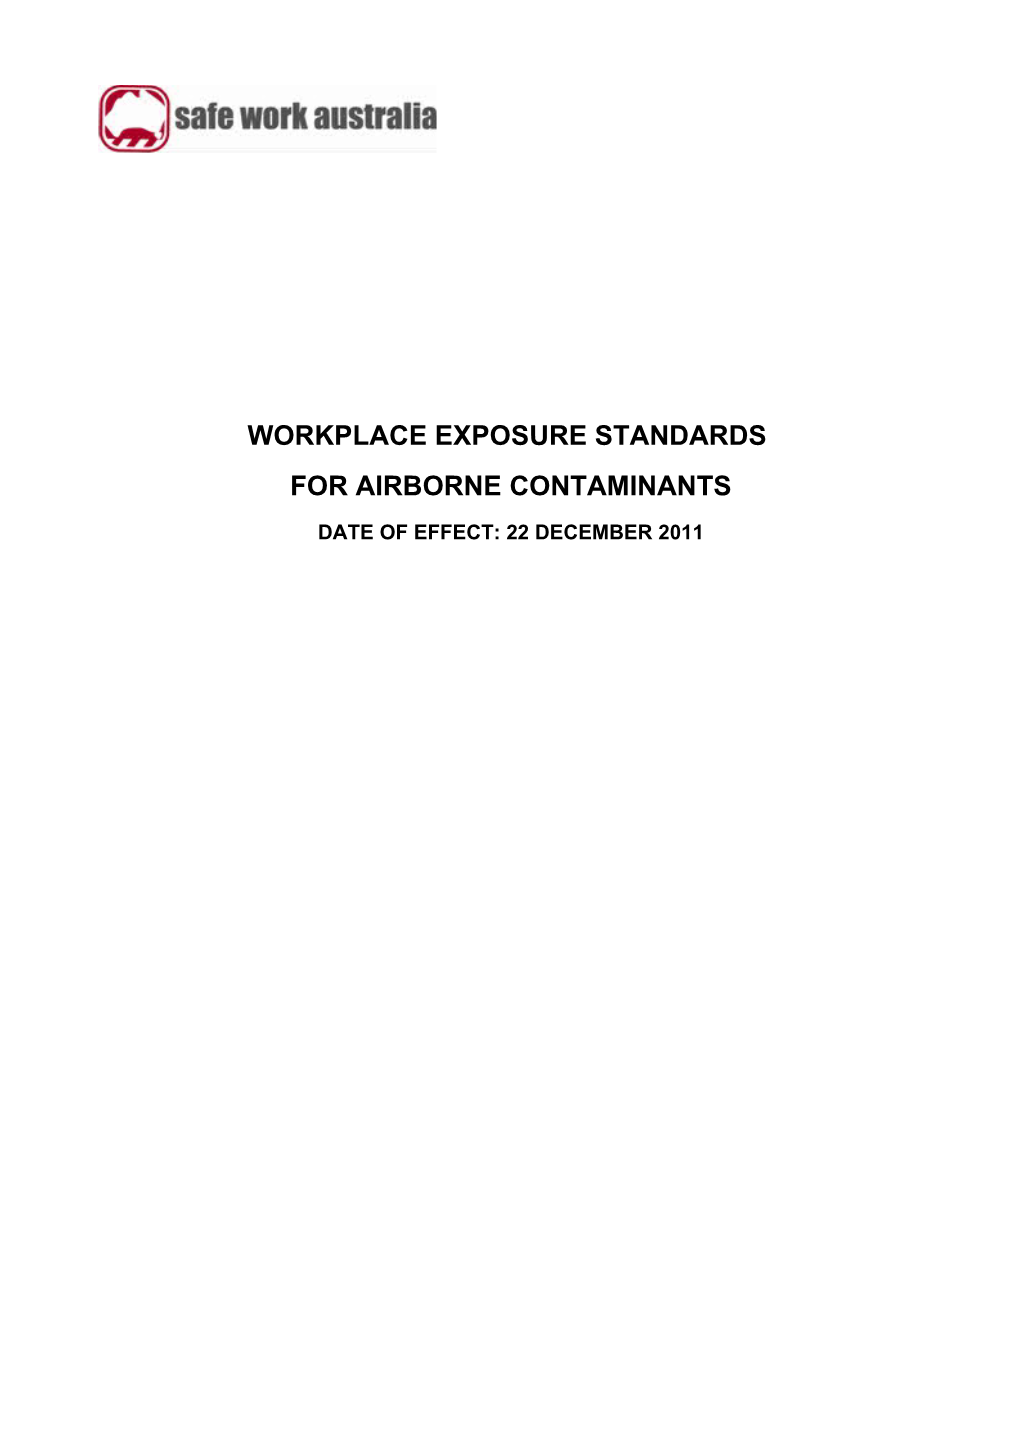 Workplace Exposure Standards for Airborne Contaminants